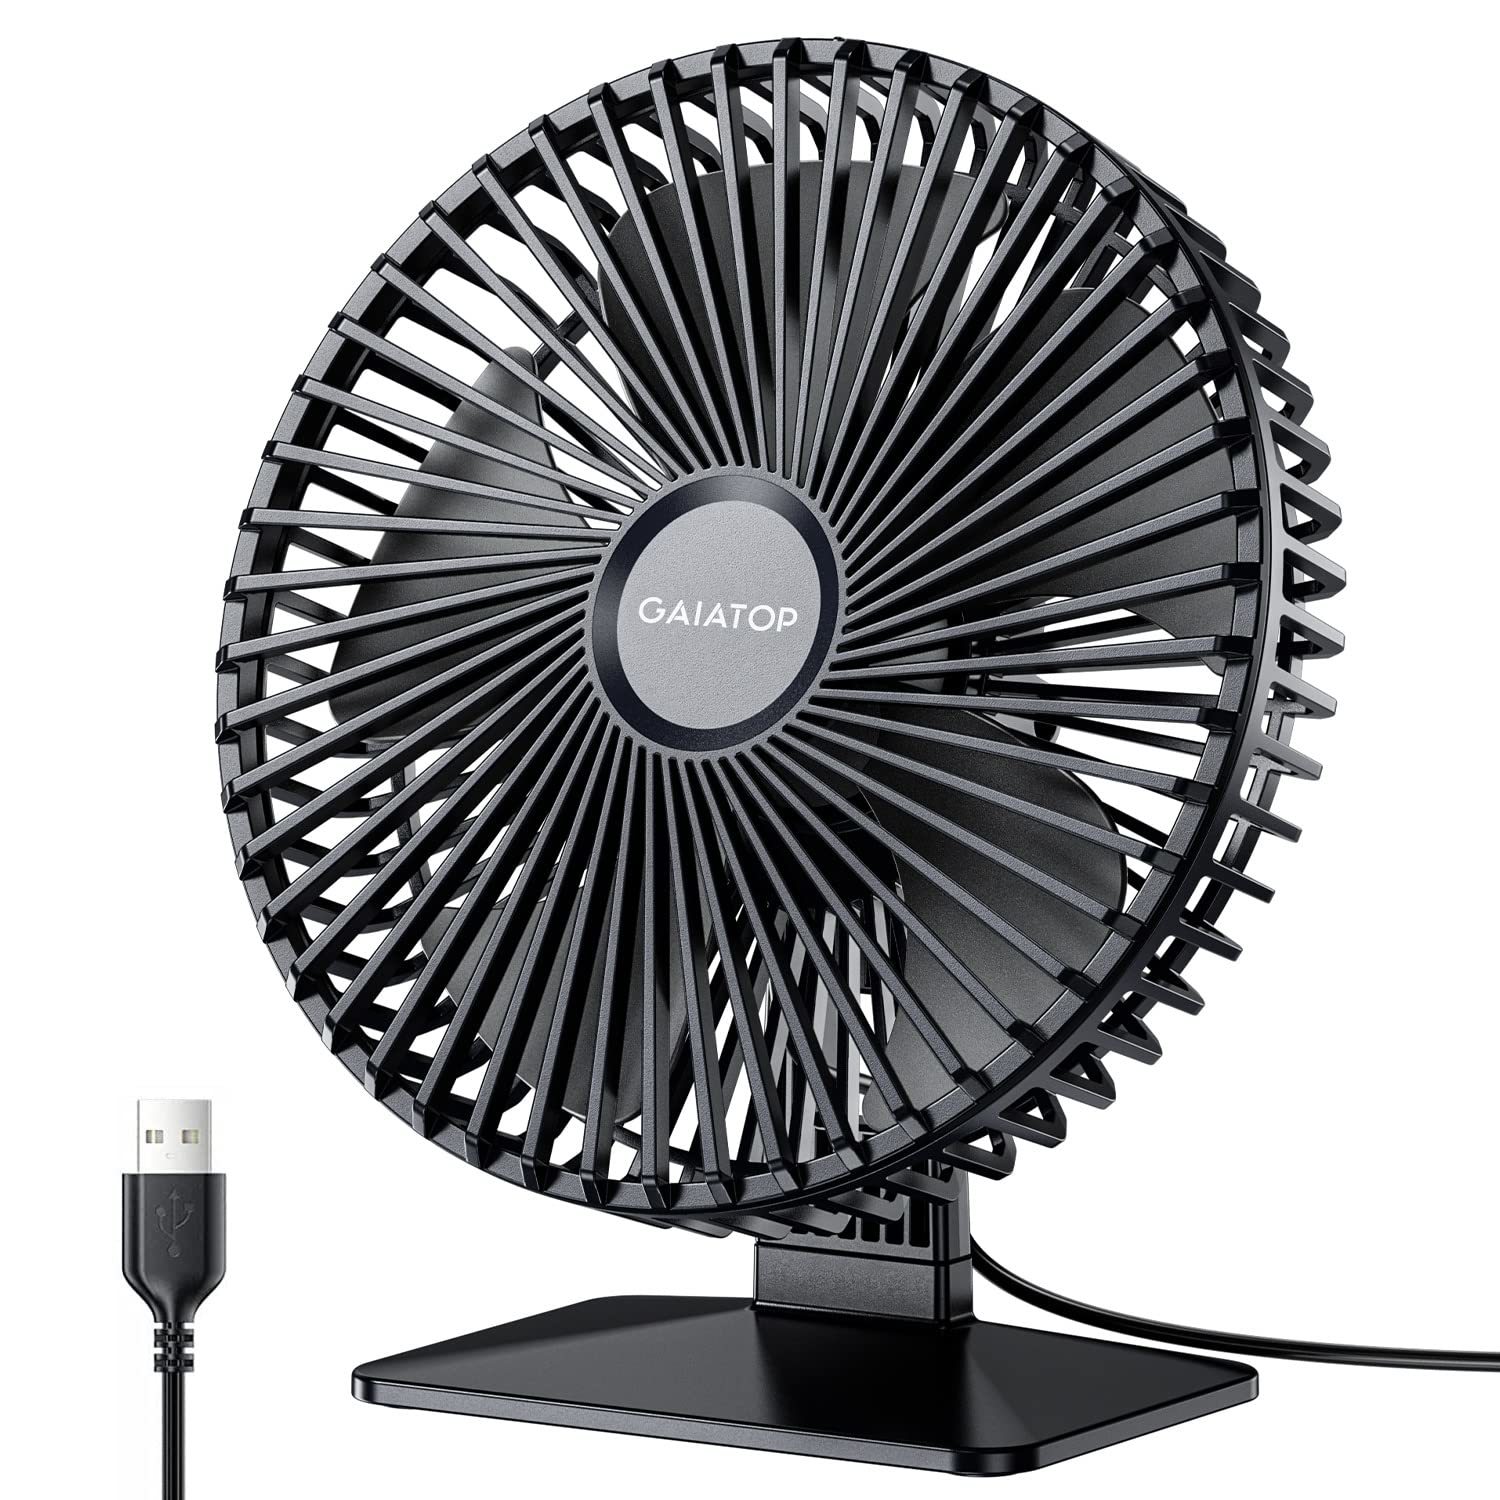 Primary image for Usb Desk Fan, 6.5 Inch Ultra-Quiet, 90 Adjustment For Better Cooling, 4 Speeds P